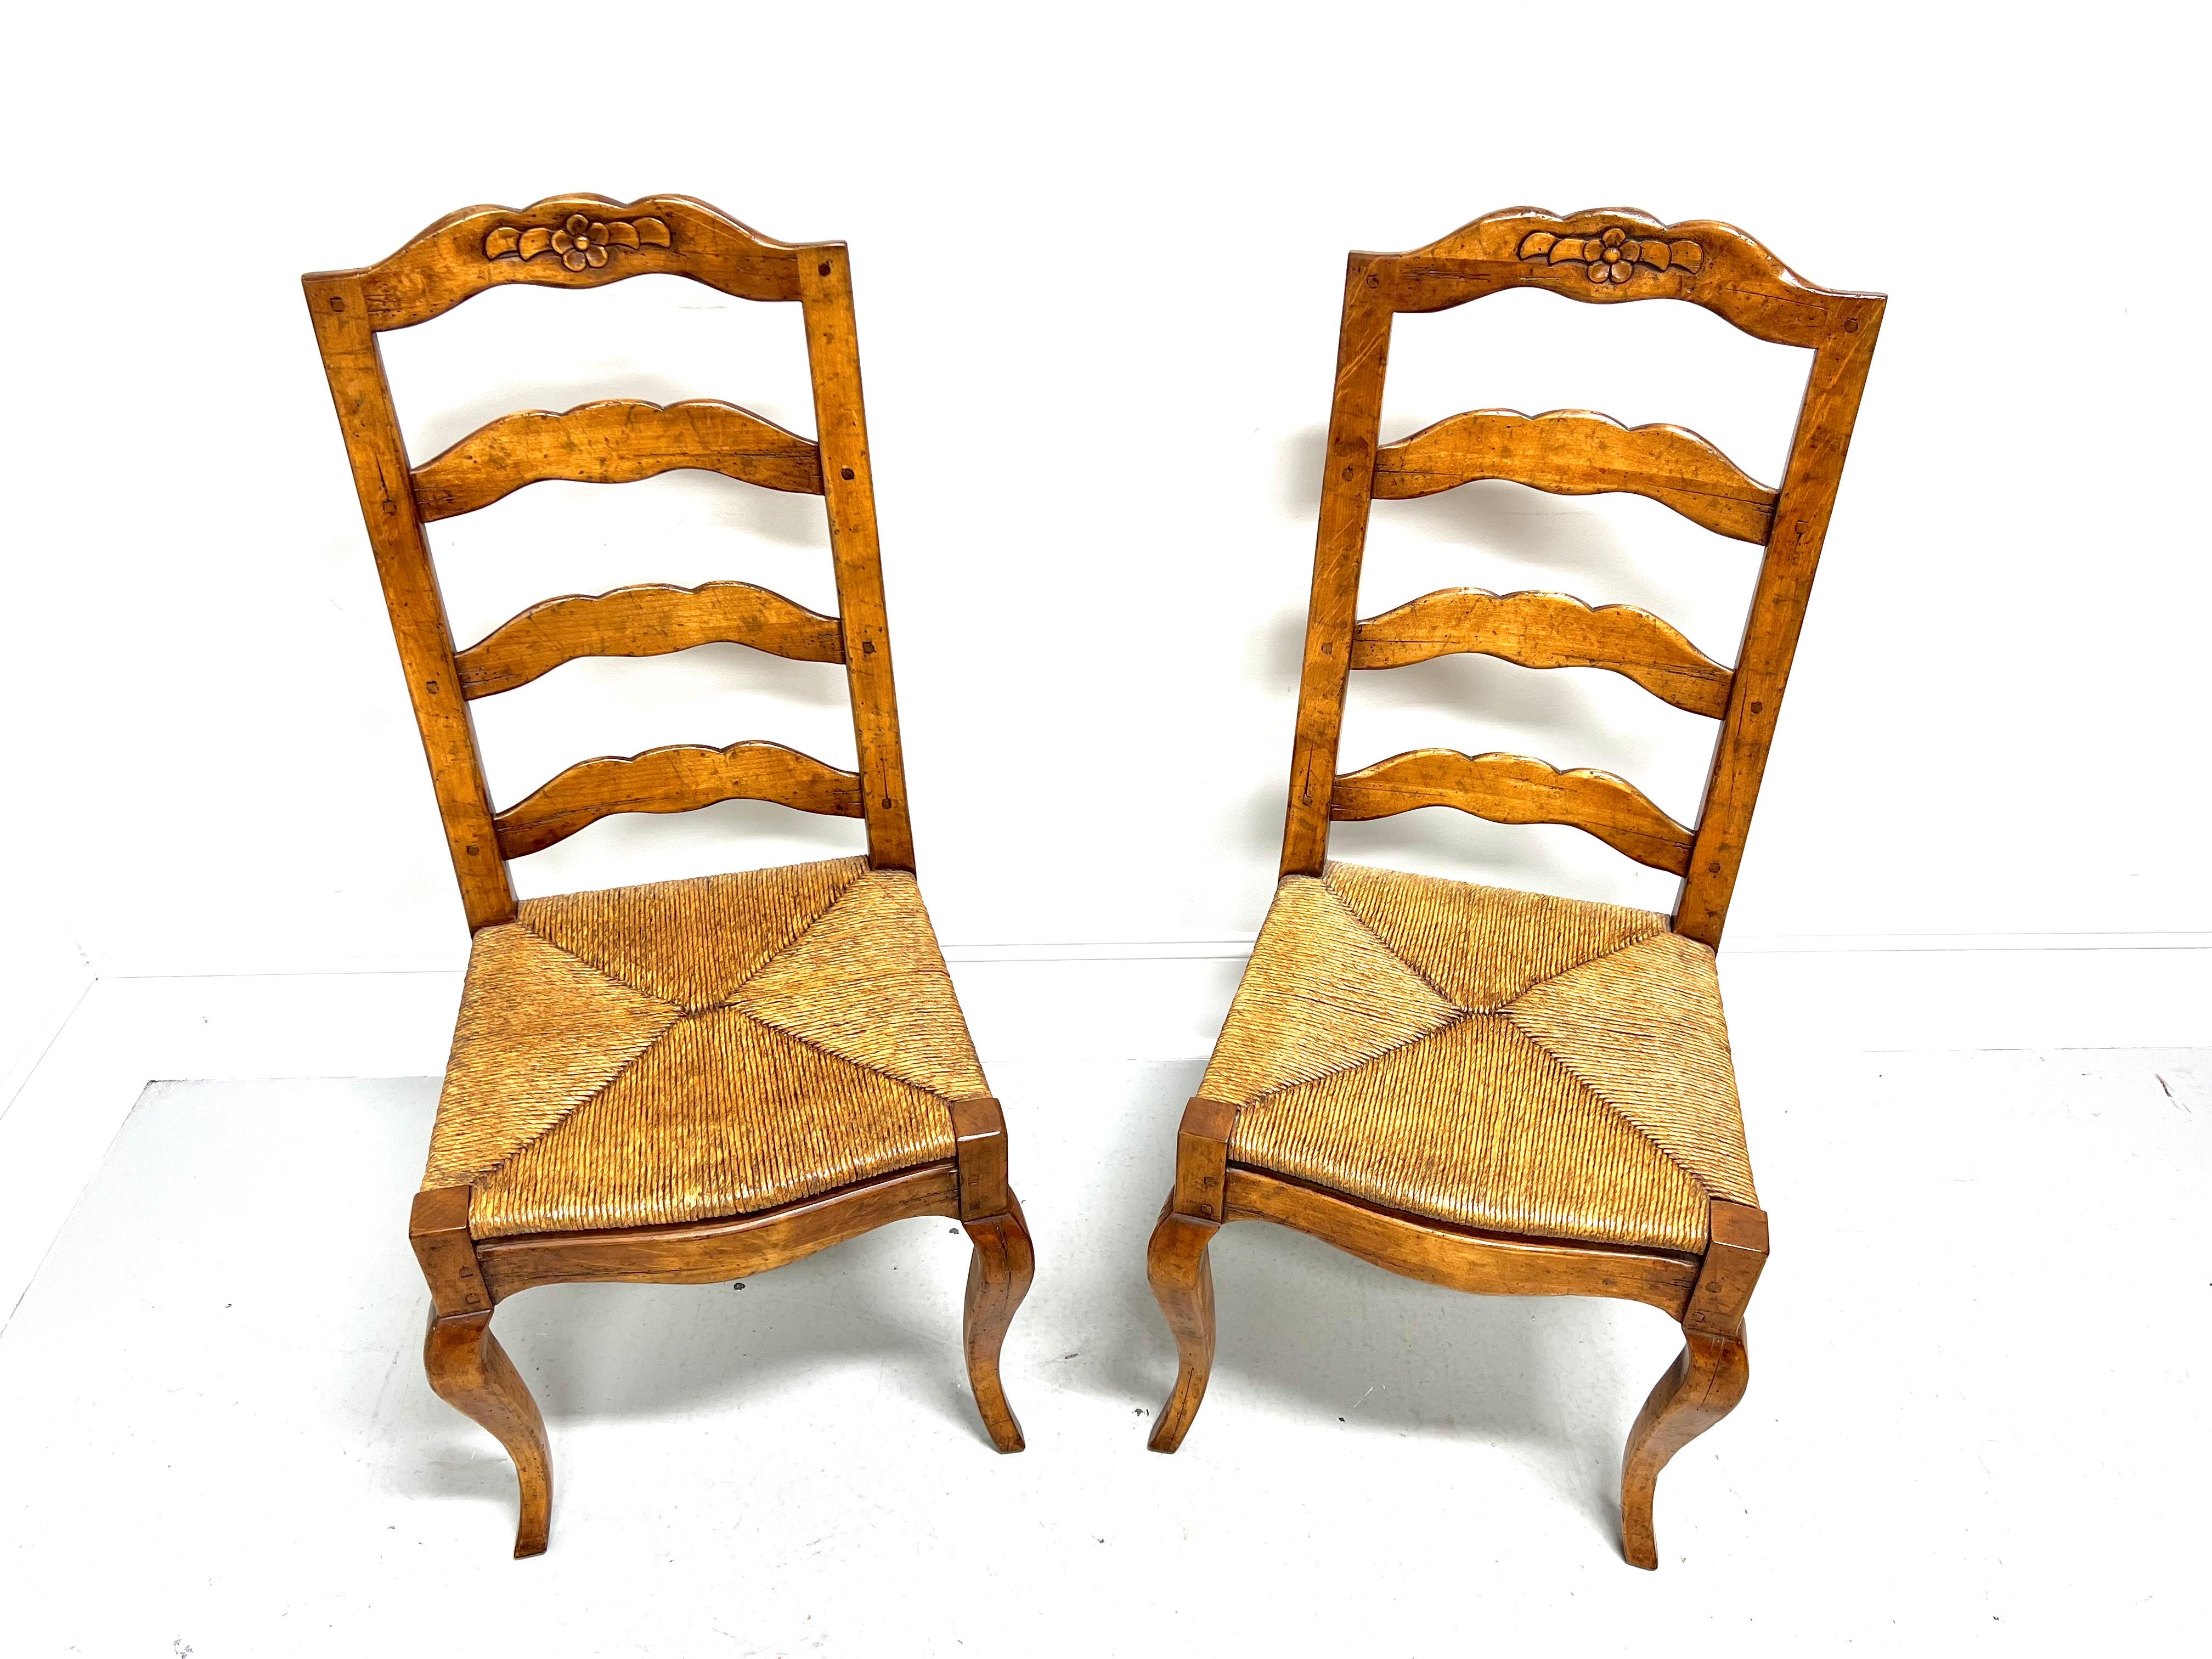 A pair of French Country style dining side chairs, unbranded. Solid nutwood with a distressed finish, ladder back design, decoratively carved crest rail, rush seats, carved apron, and curved legs. Made in the USA, in the late 20th